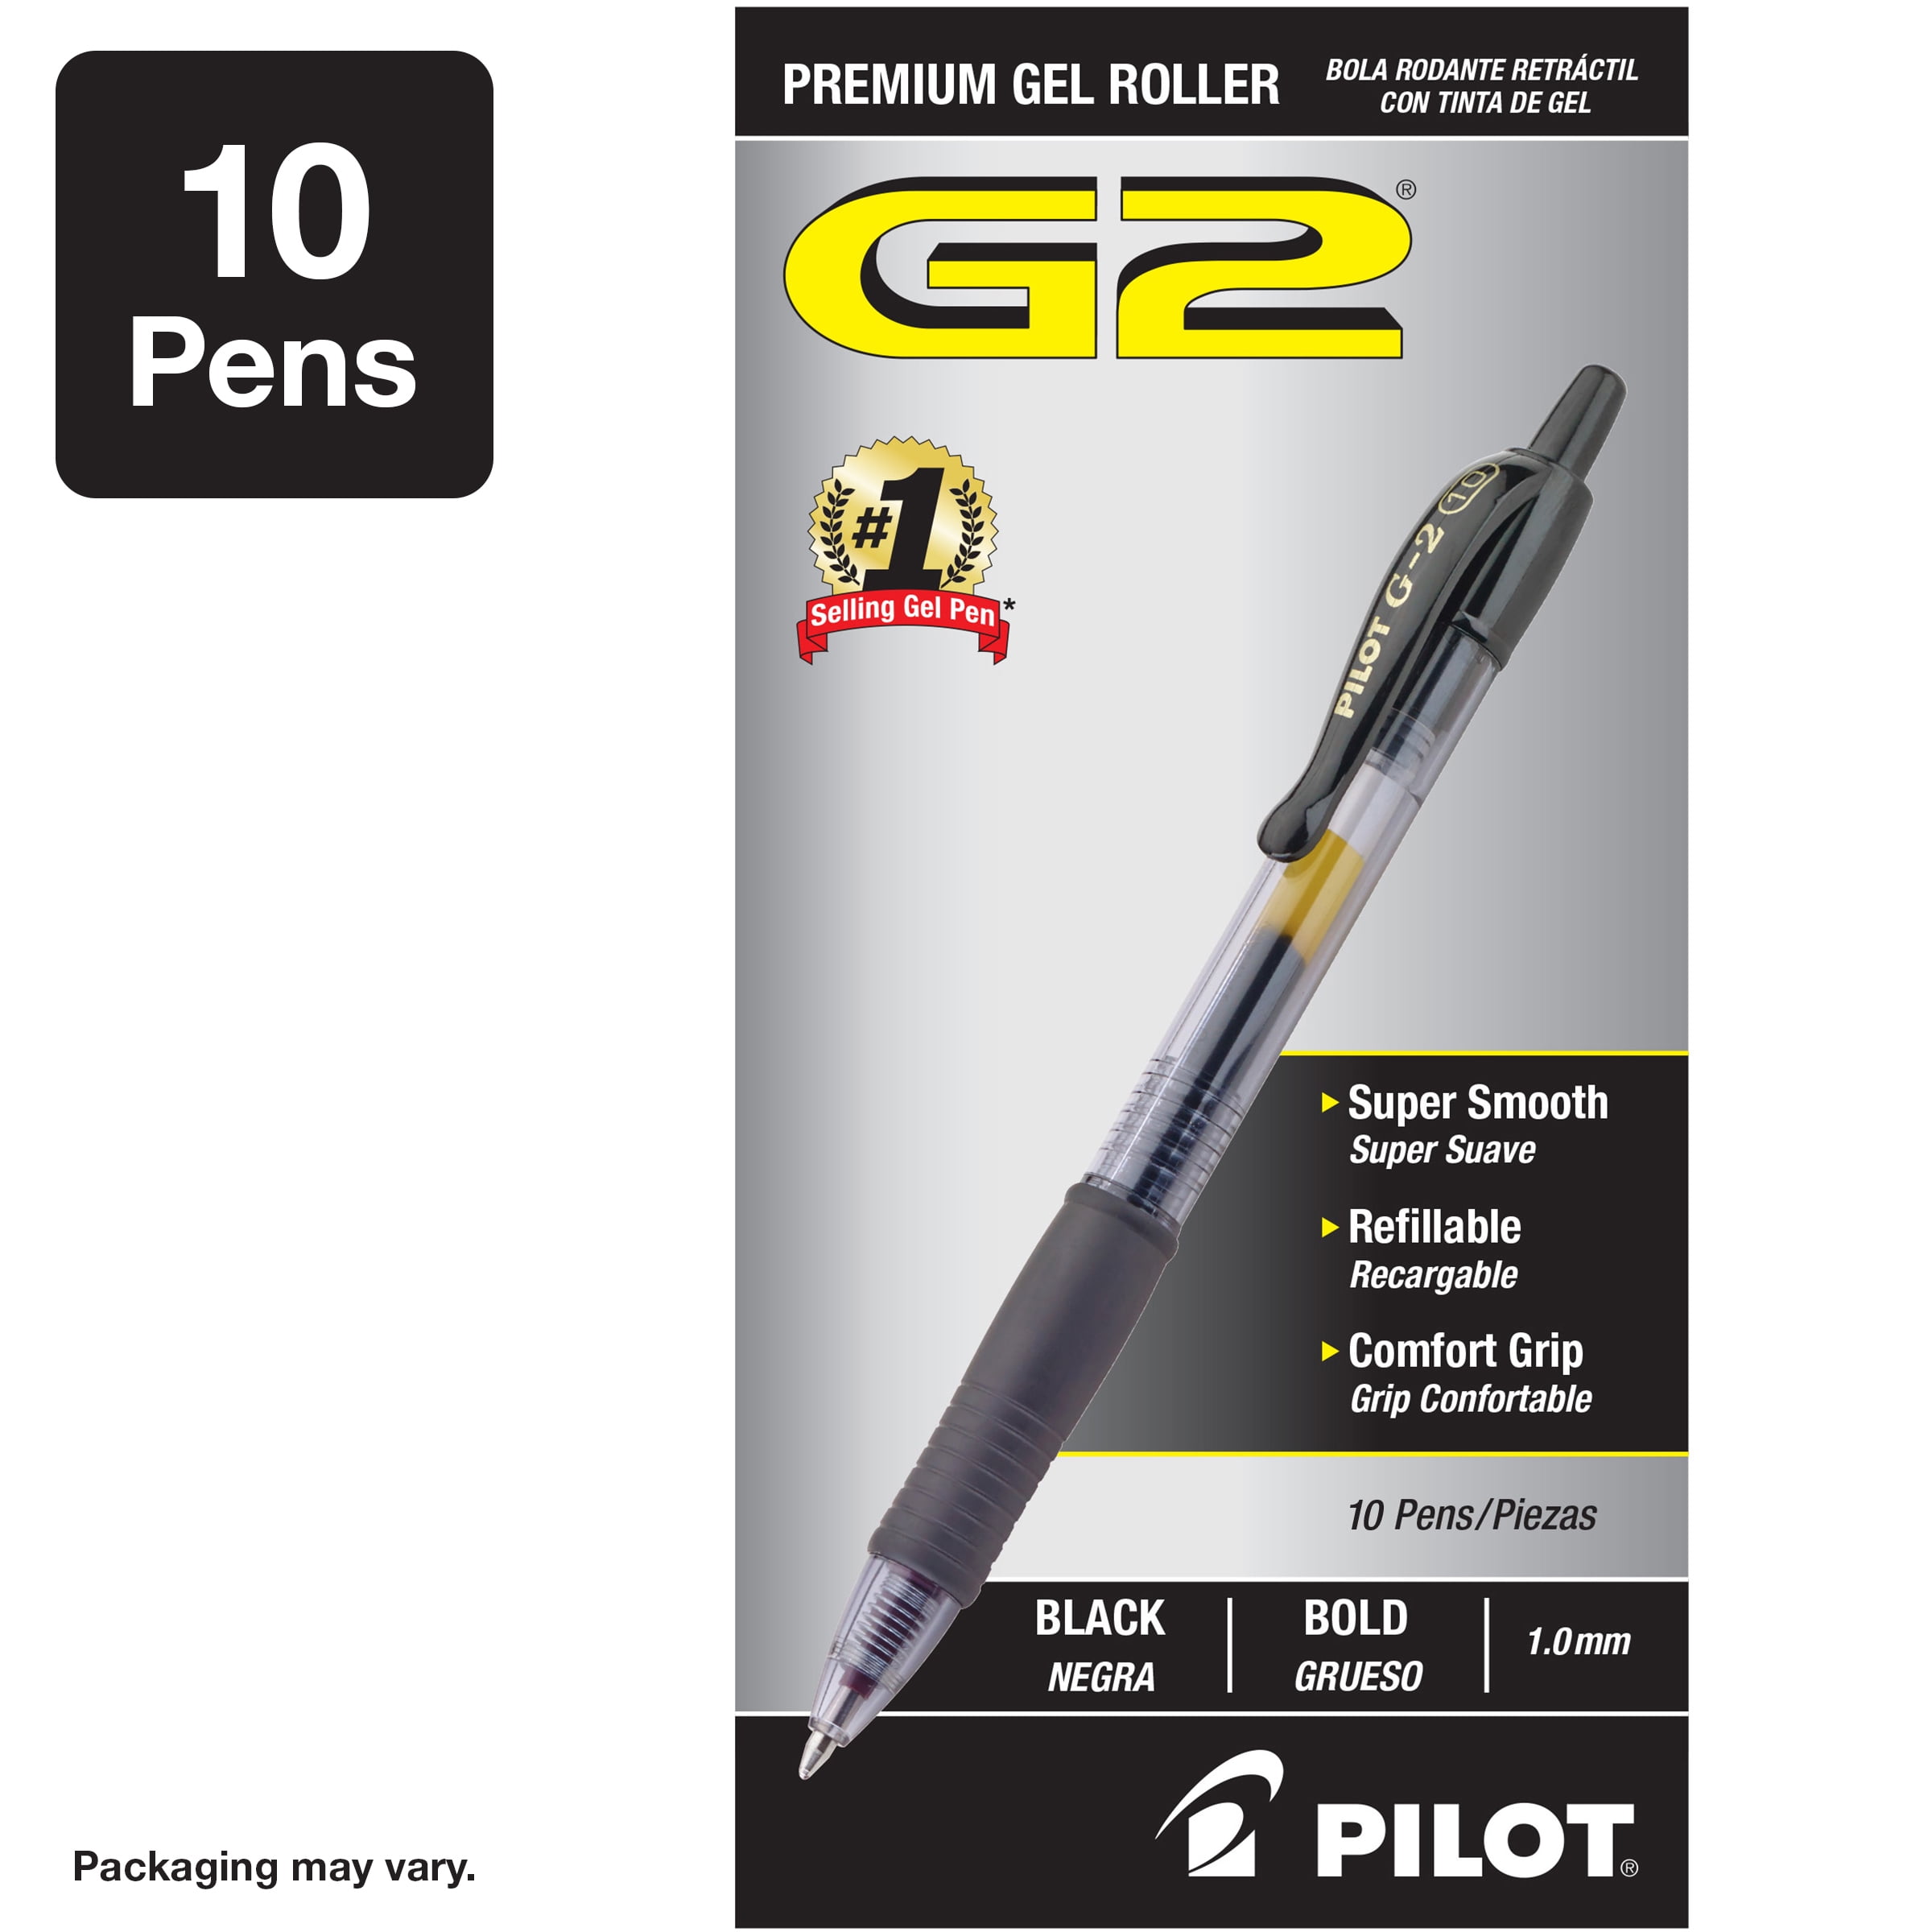 Black Ink PILOT G2 Premium Refillable & Retractable Rolling Ball Gel Pens Bold Point 12 Count 31256 Pack of 1 